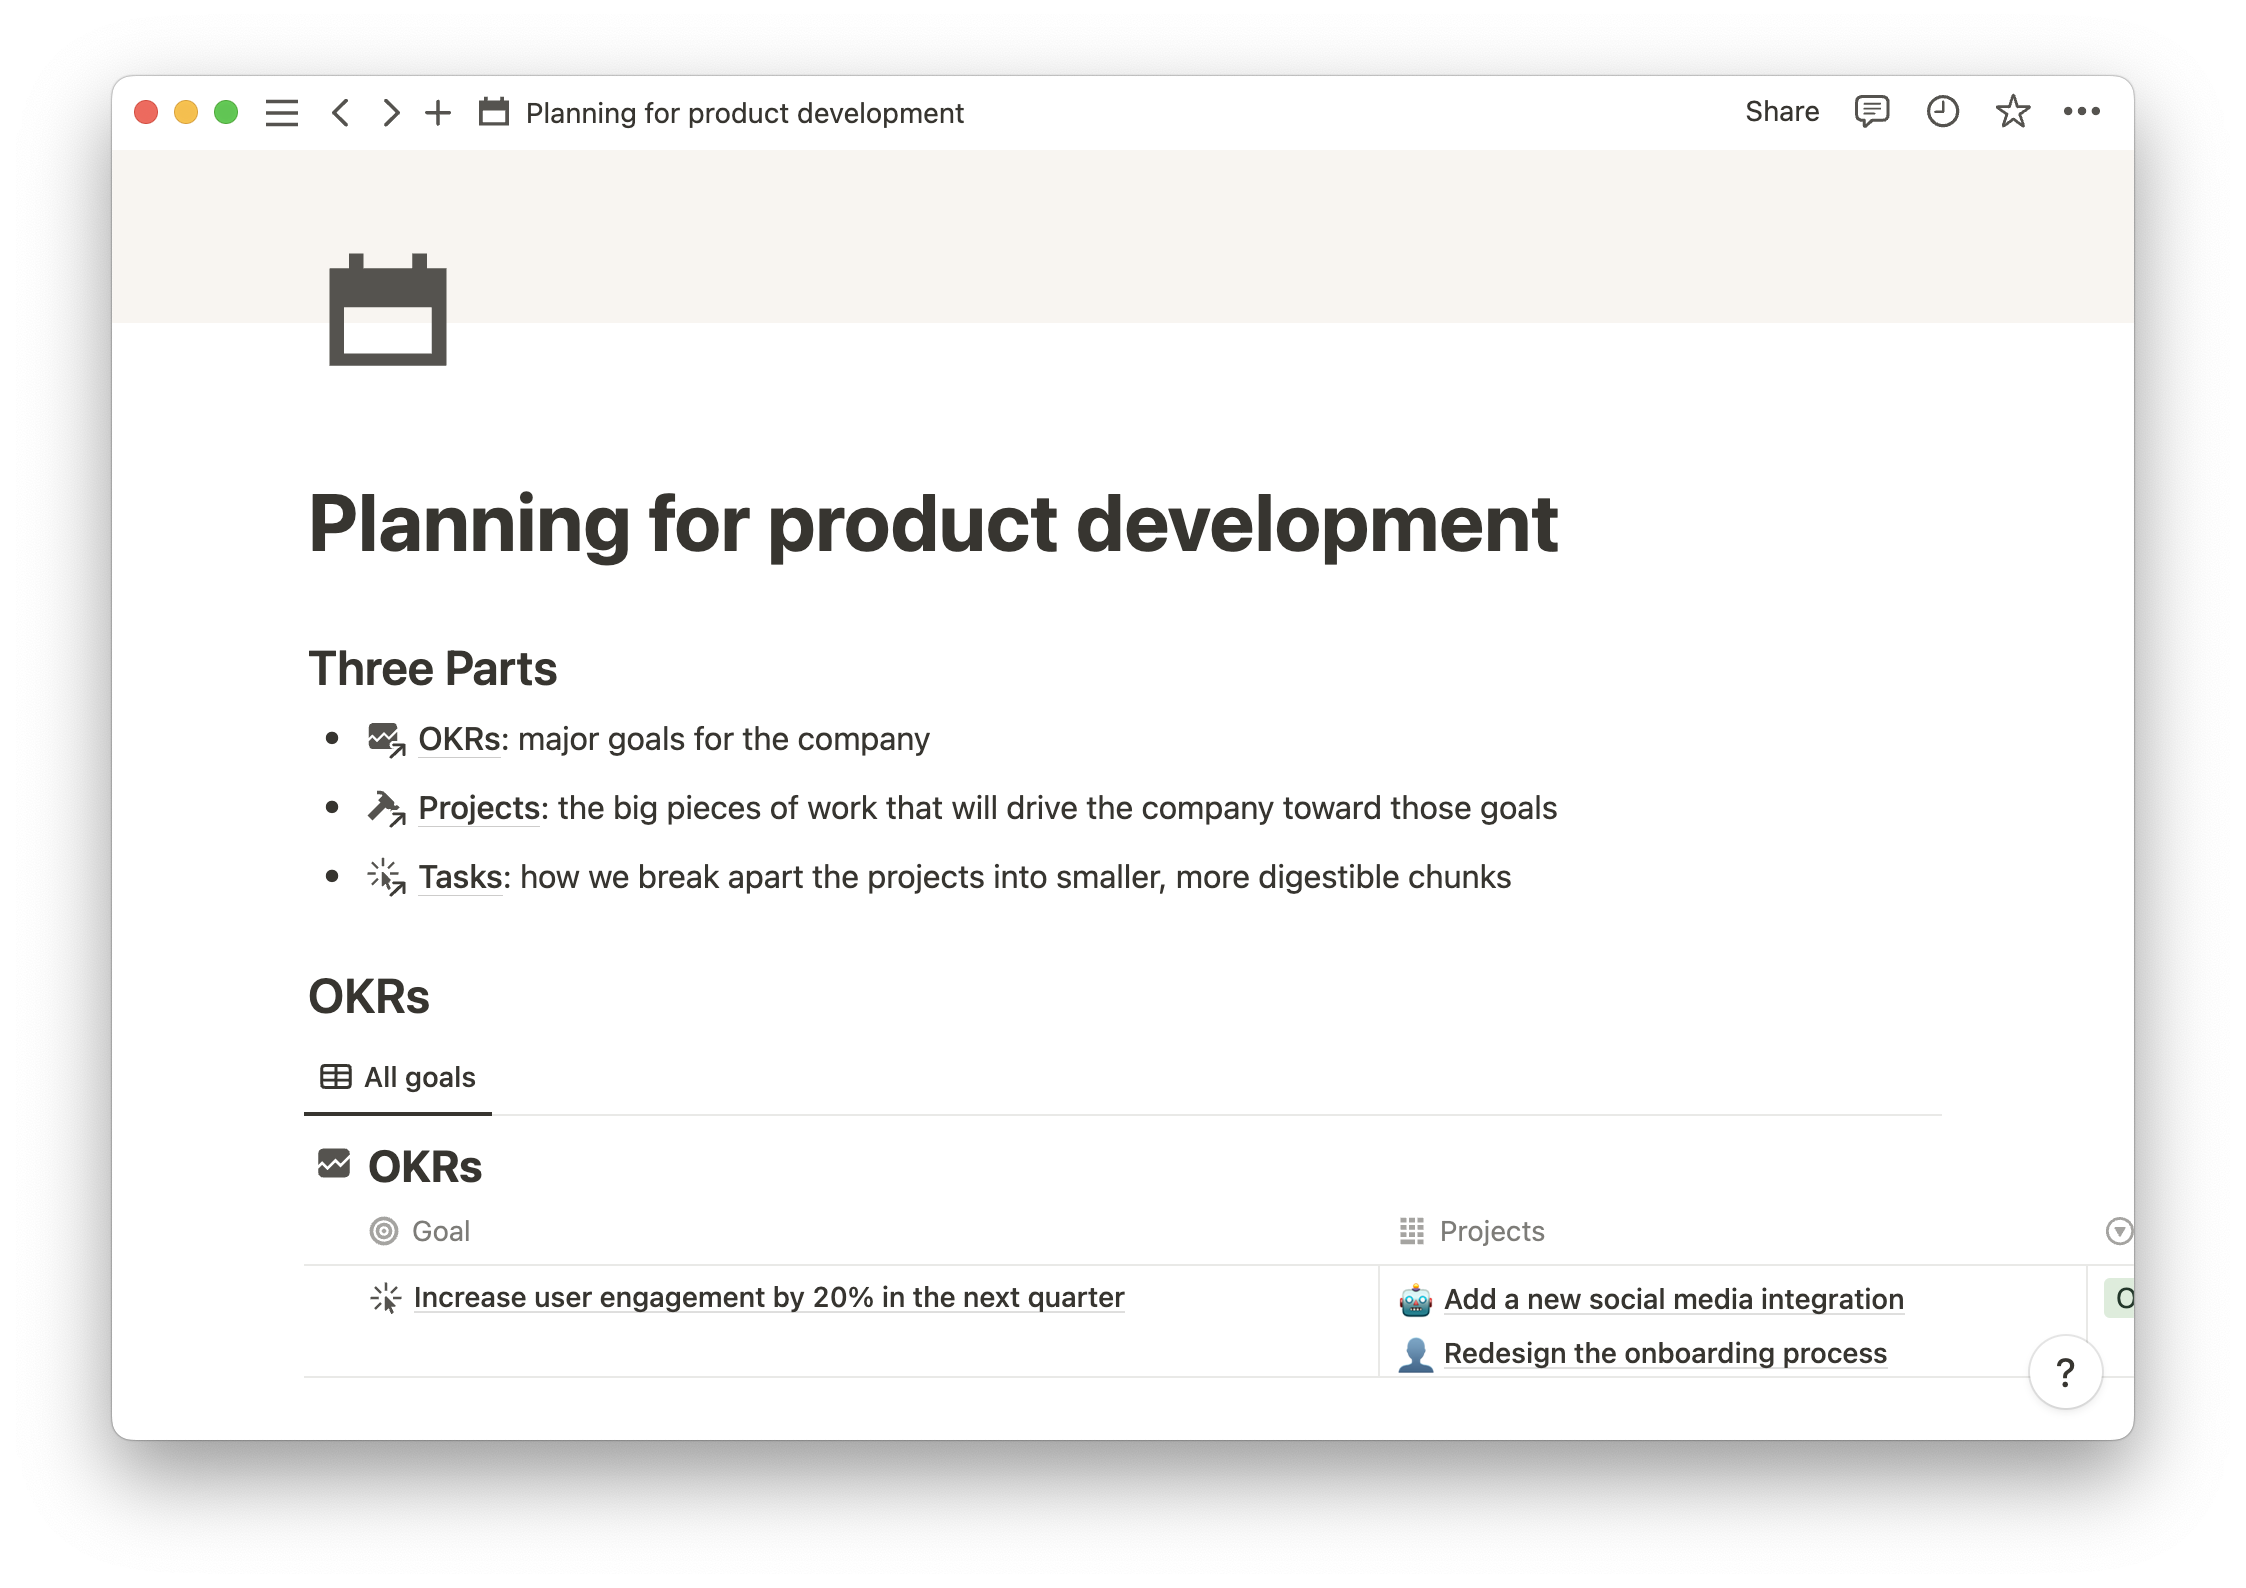 notion-s-planning-for-product-developement-template